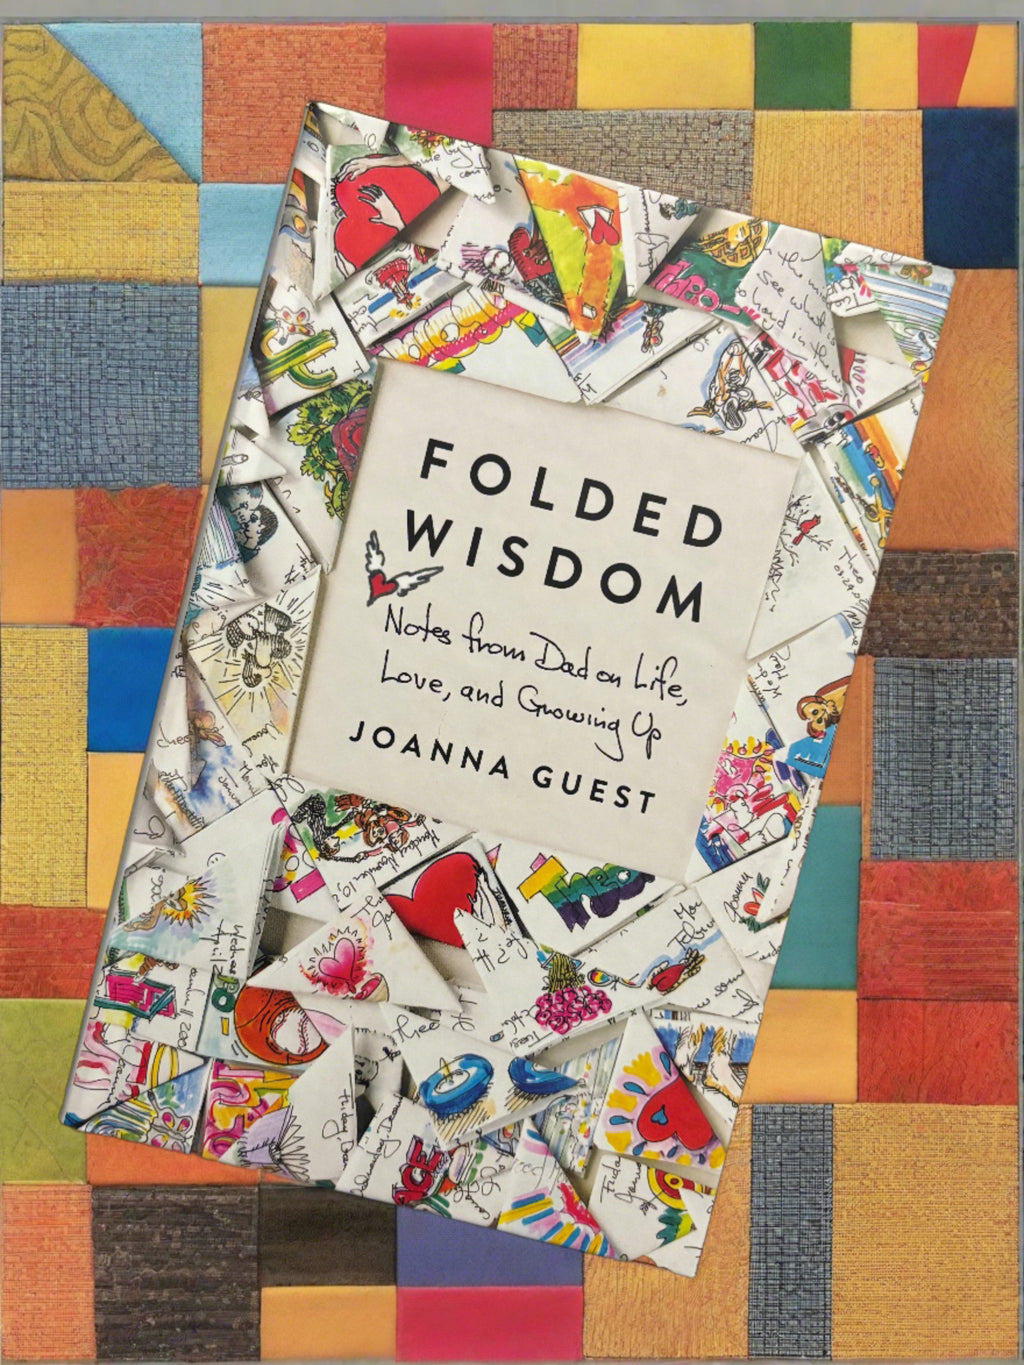 Folded Wisdom: Notes from Dad on Life, Love, and Growing Up- By Joanna Guest